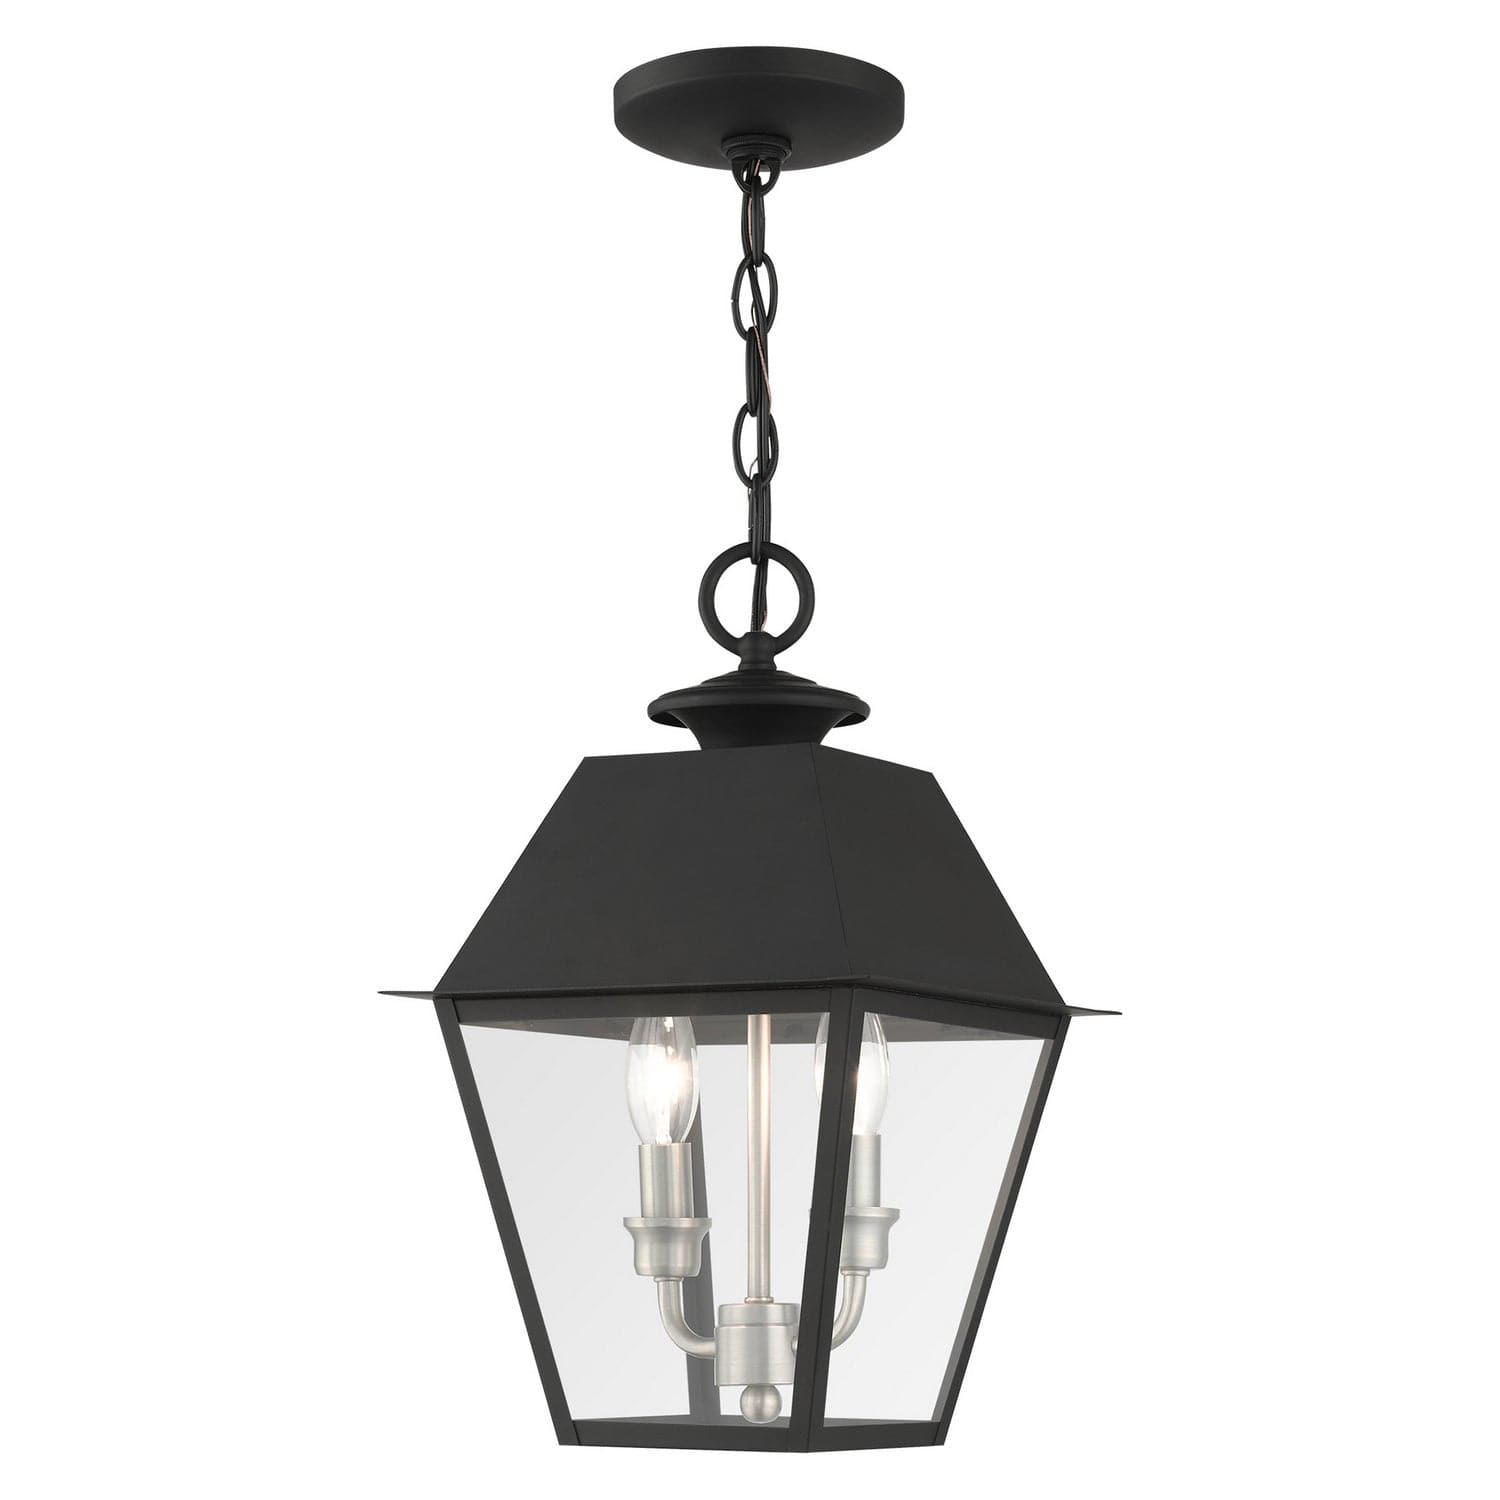 Livex Lighting - 27217-04 - Two Light Outdoor Pendant - Wentworth - Black w/ Brushed Nickel Cluster